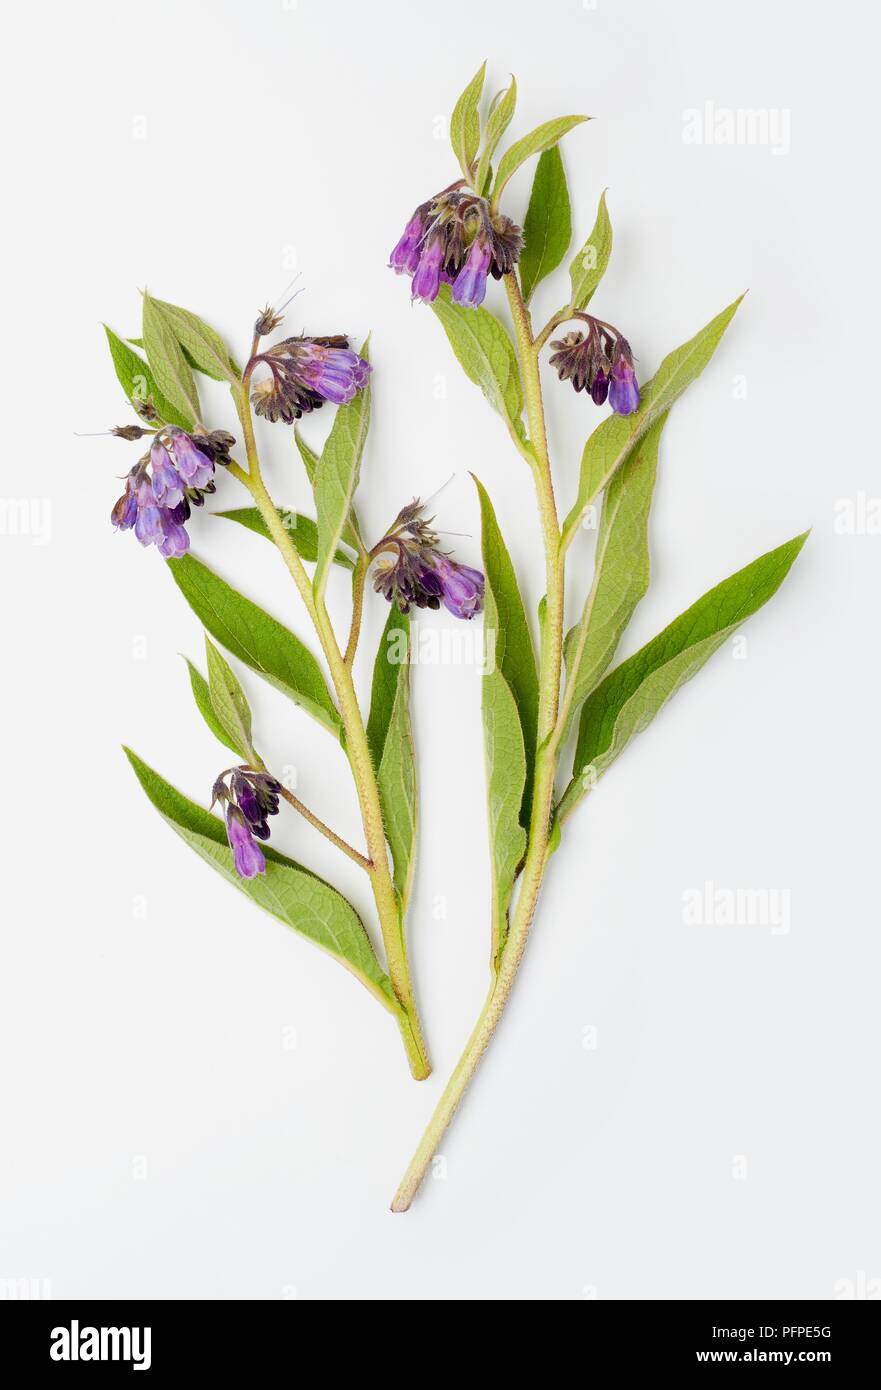 Symphytum officinale (Comfrey) stems with leaves and purple flowers Stock Photo